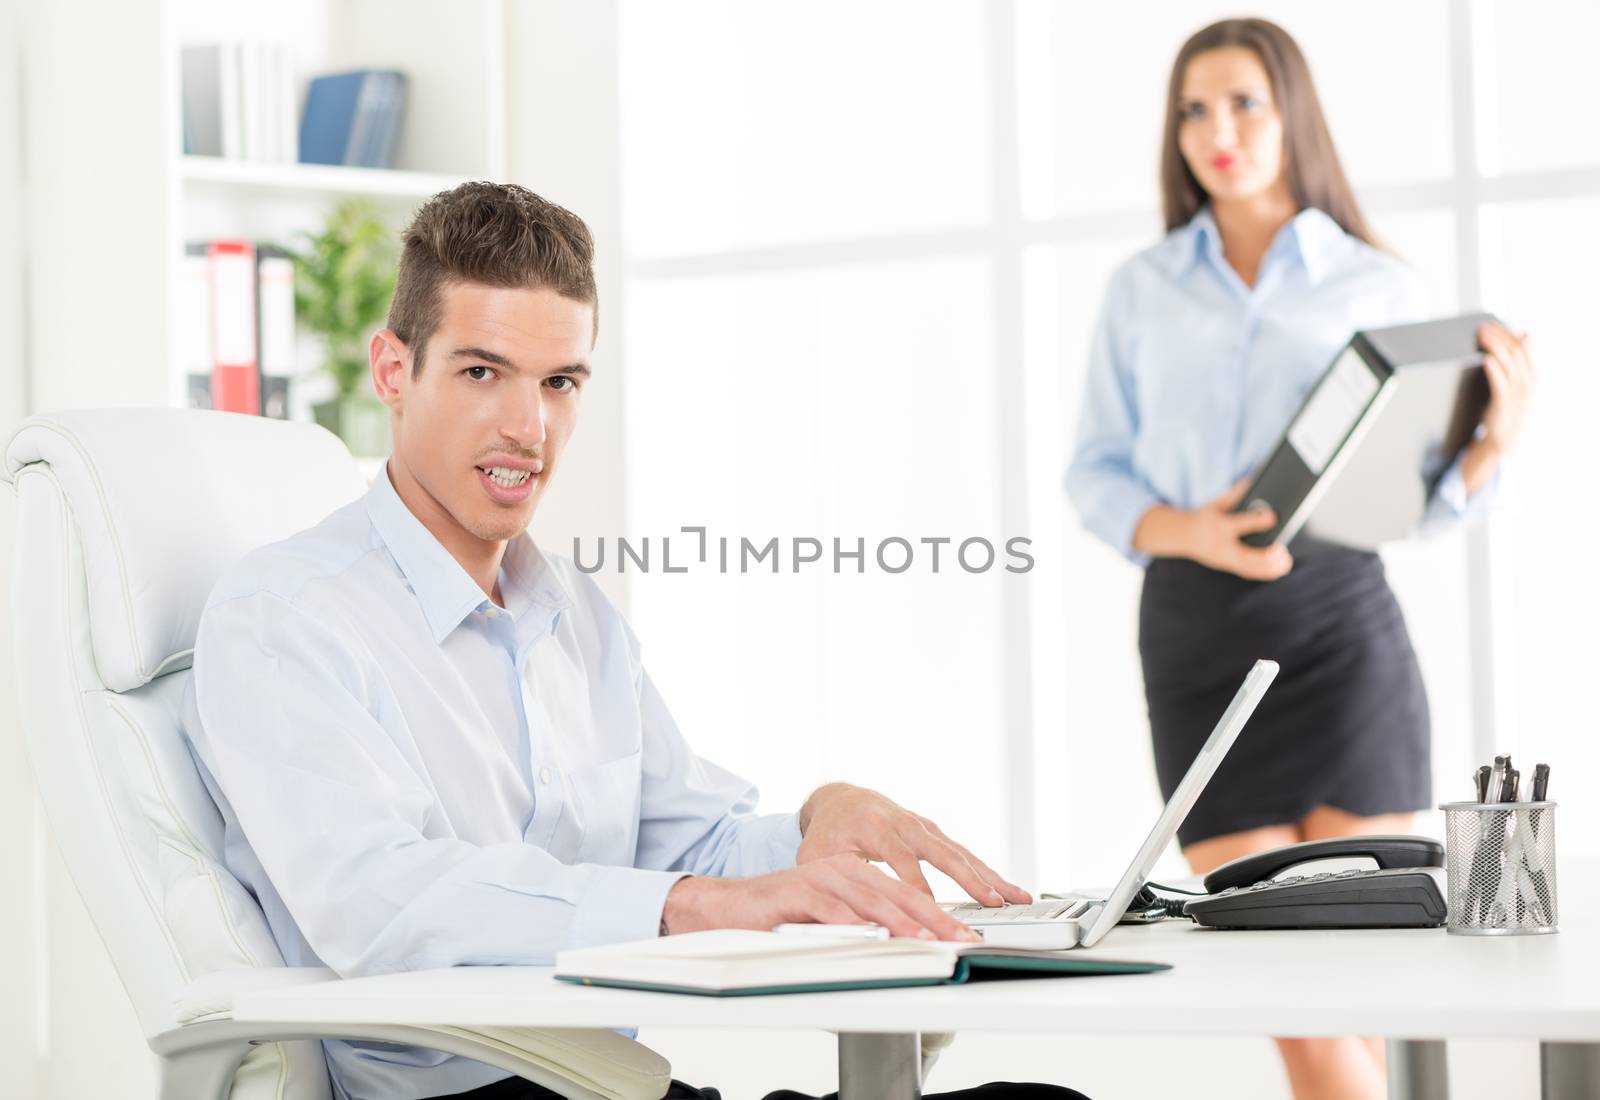 Young businessman sitting in office chair in front of a laptop, with a smile looking at the camera in the background is a young woman holding a binder.